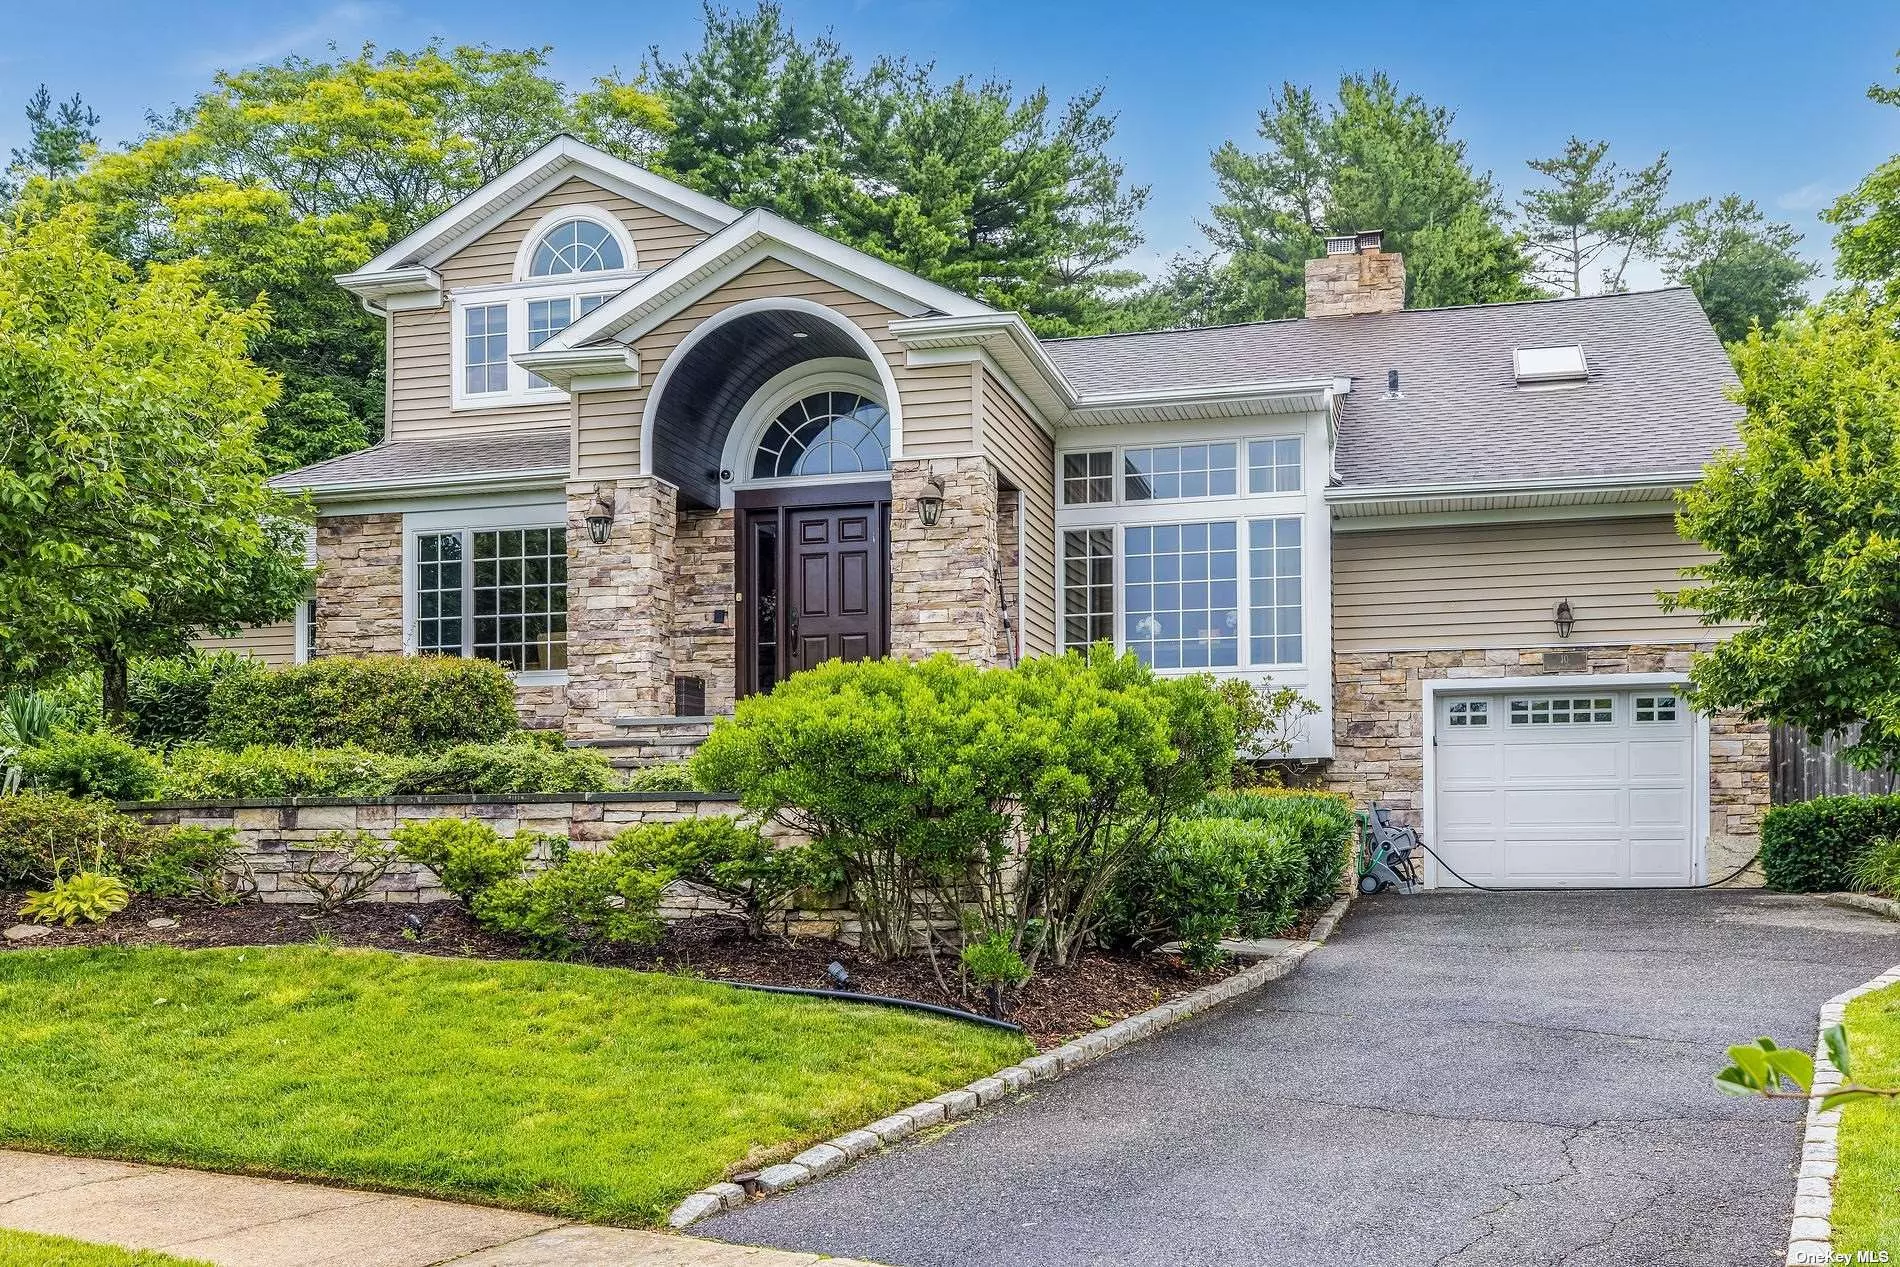 BIGGER & BETTER is always the BEST! Delightful custom-built front-to-back split in the BEST location that&rsquo;s easily accessible to Jericho Schools, Library, Jericho Mall, LIRR, all Transpotations. This colonial has 5 bedrooms and 3 full bath, great for big families.